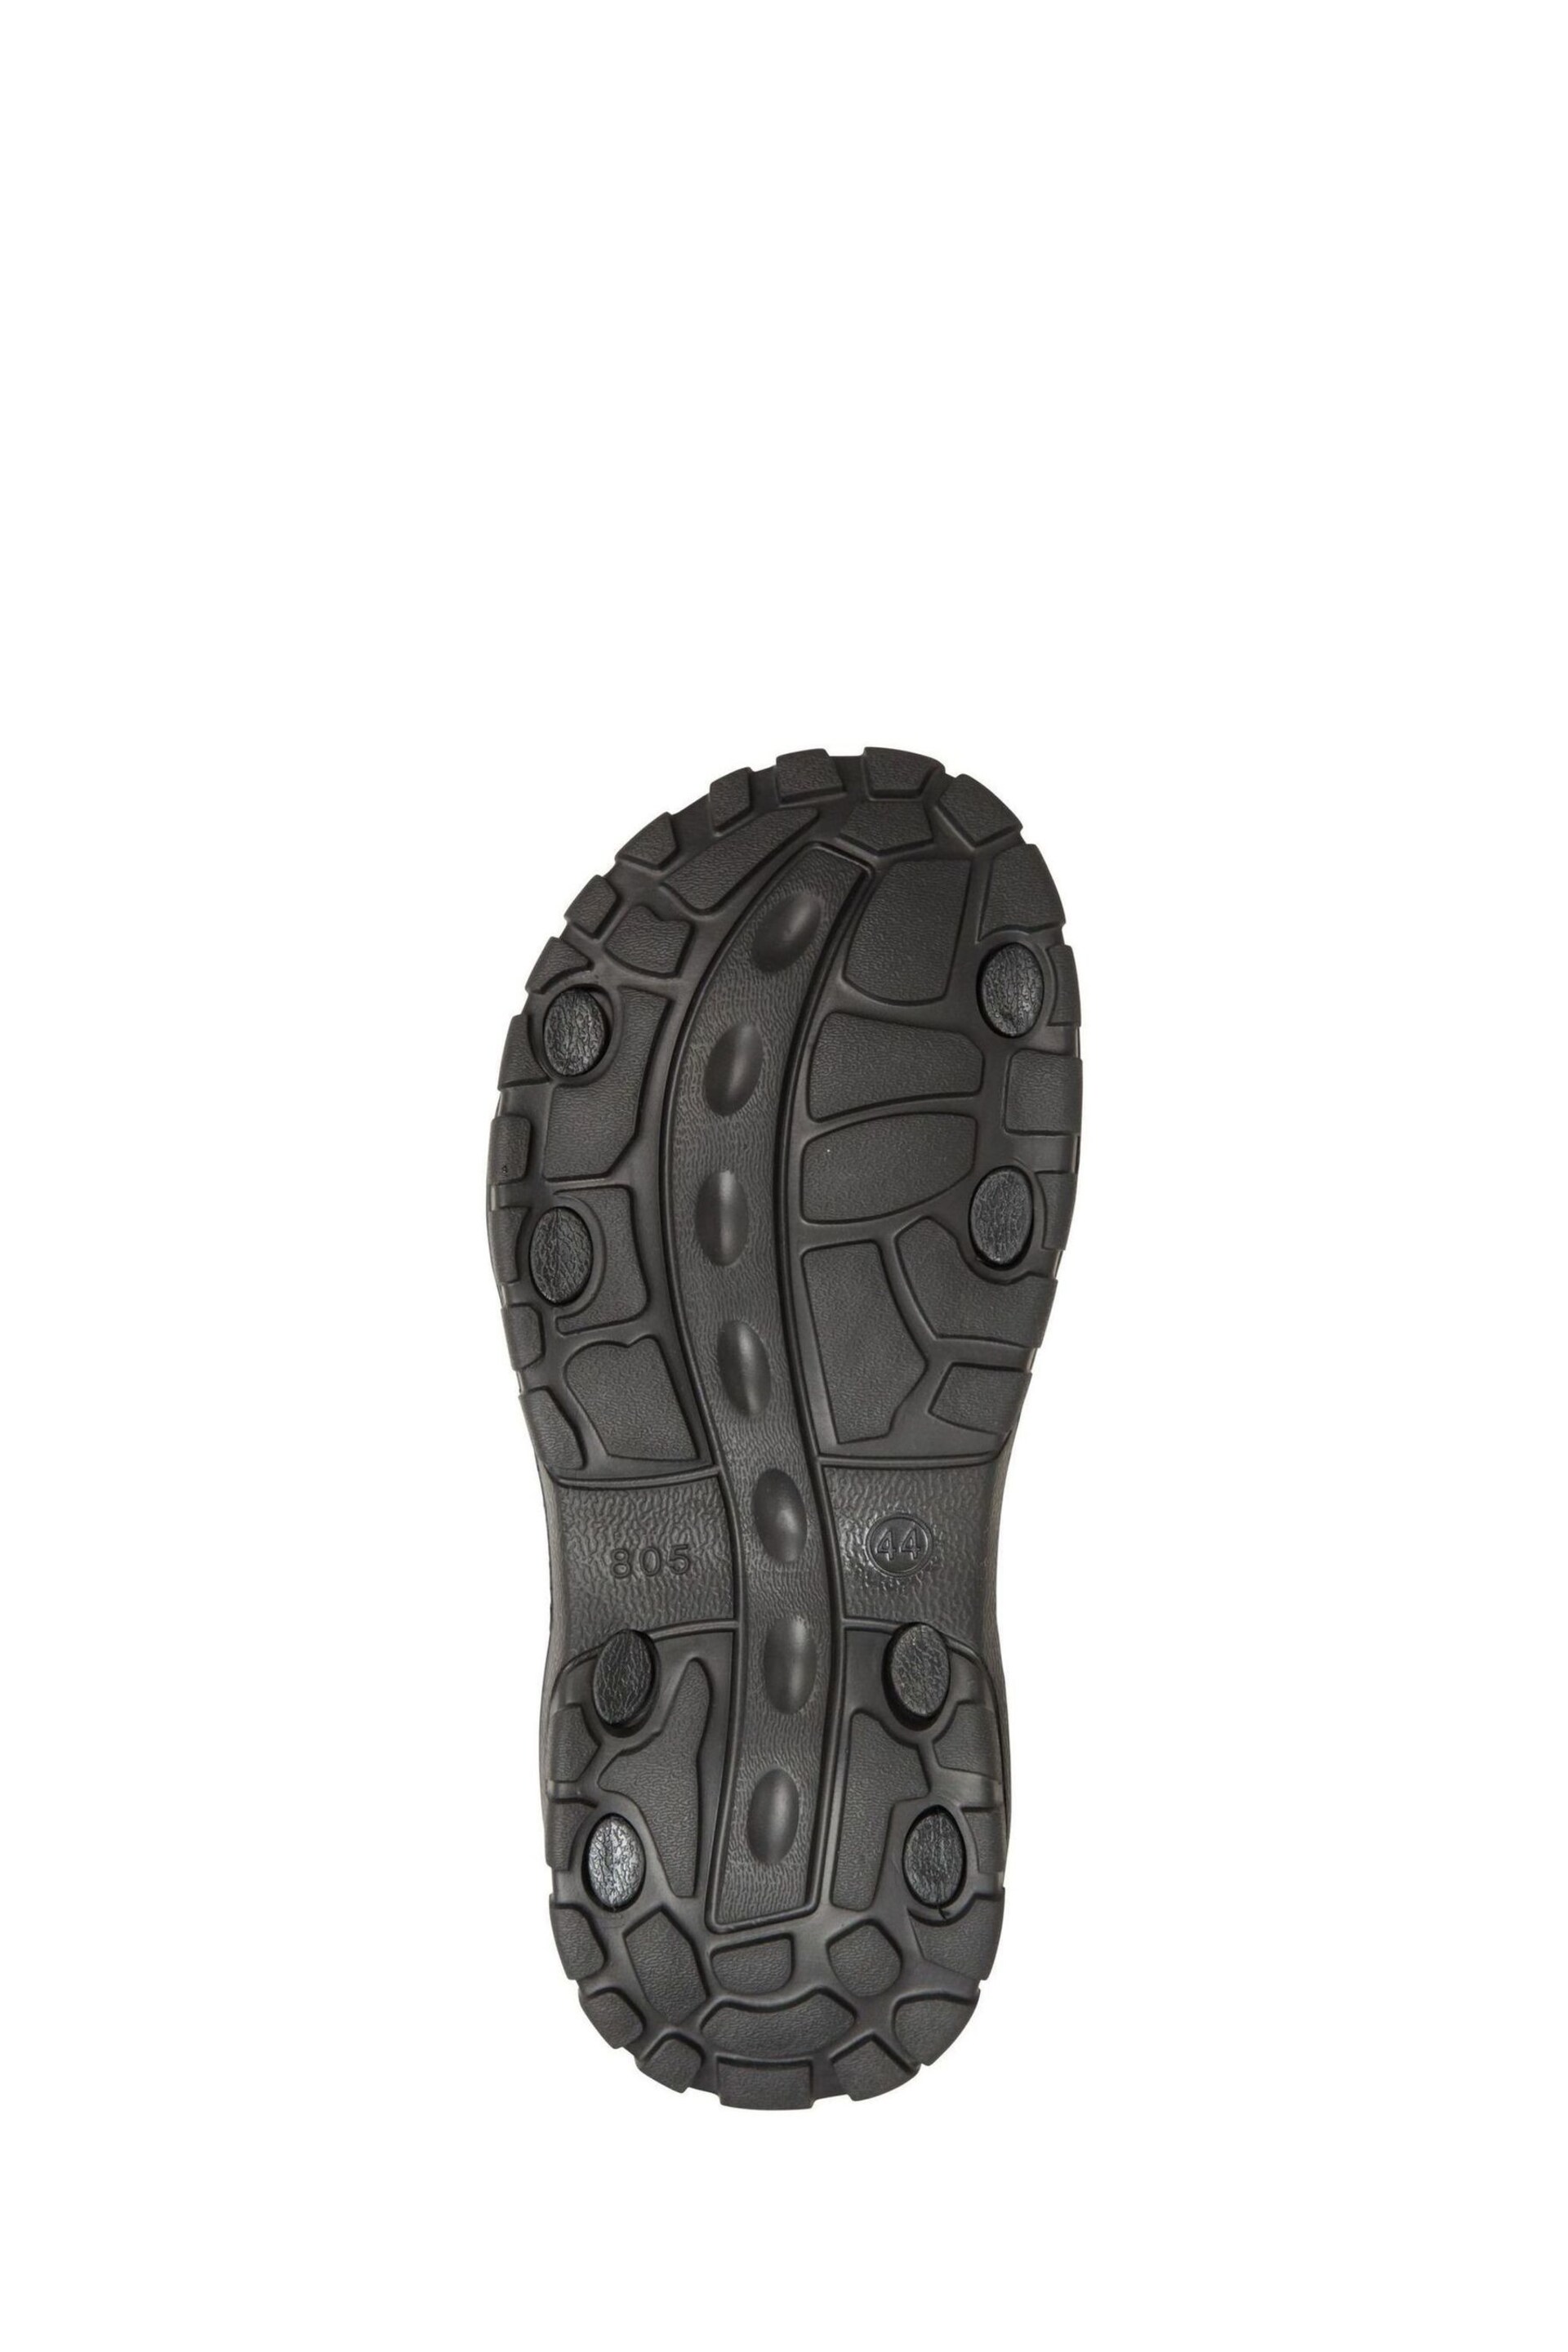 Mountain Warehouse Brown Crete Mens Sandals - Image 3 of 6